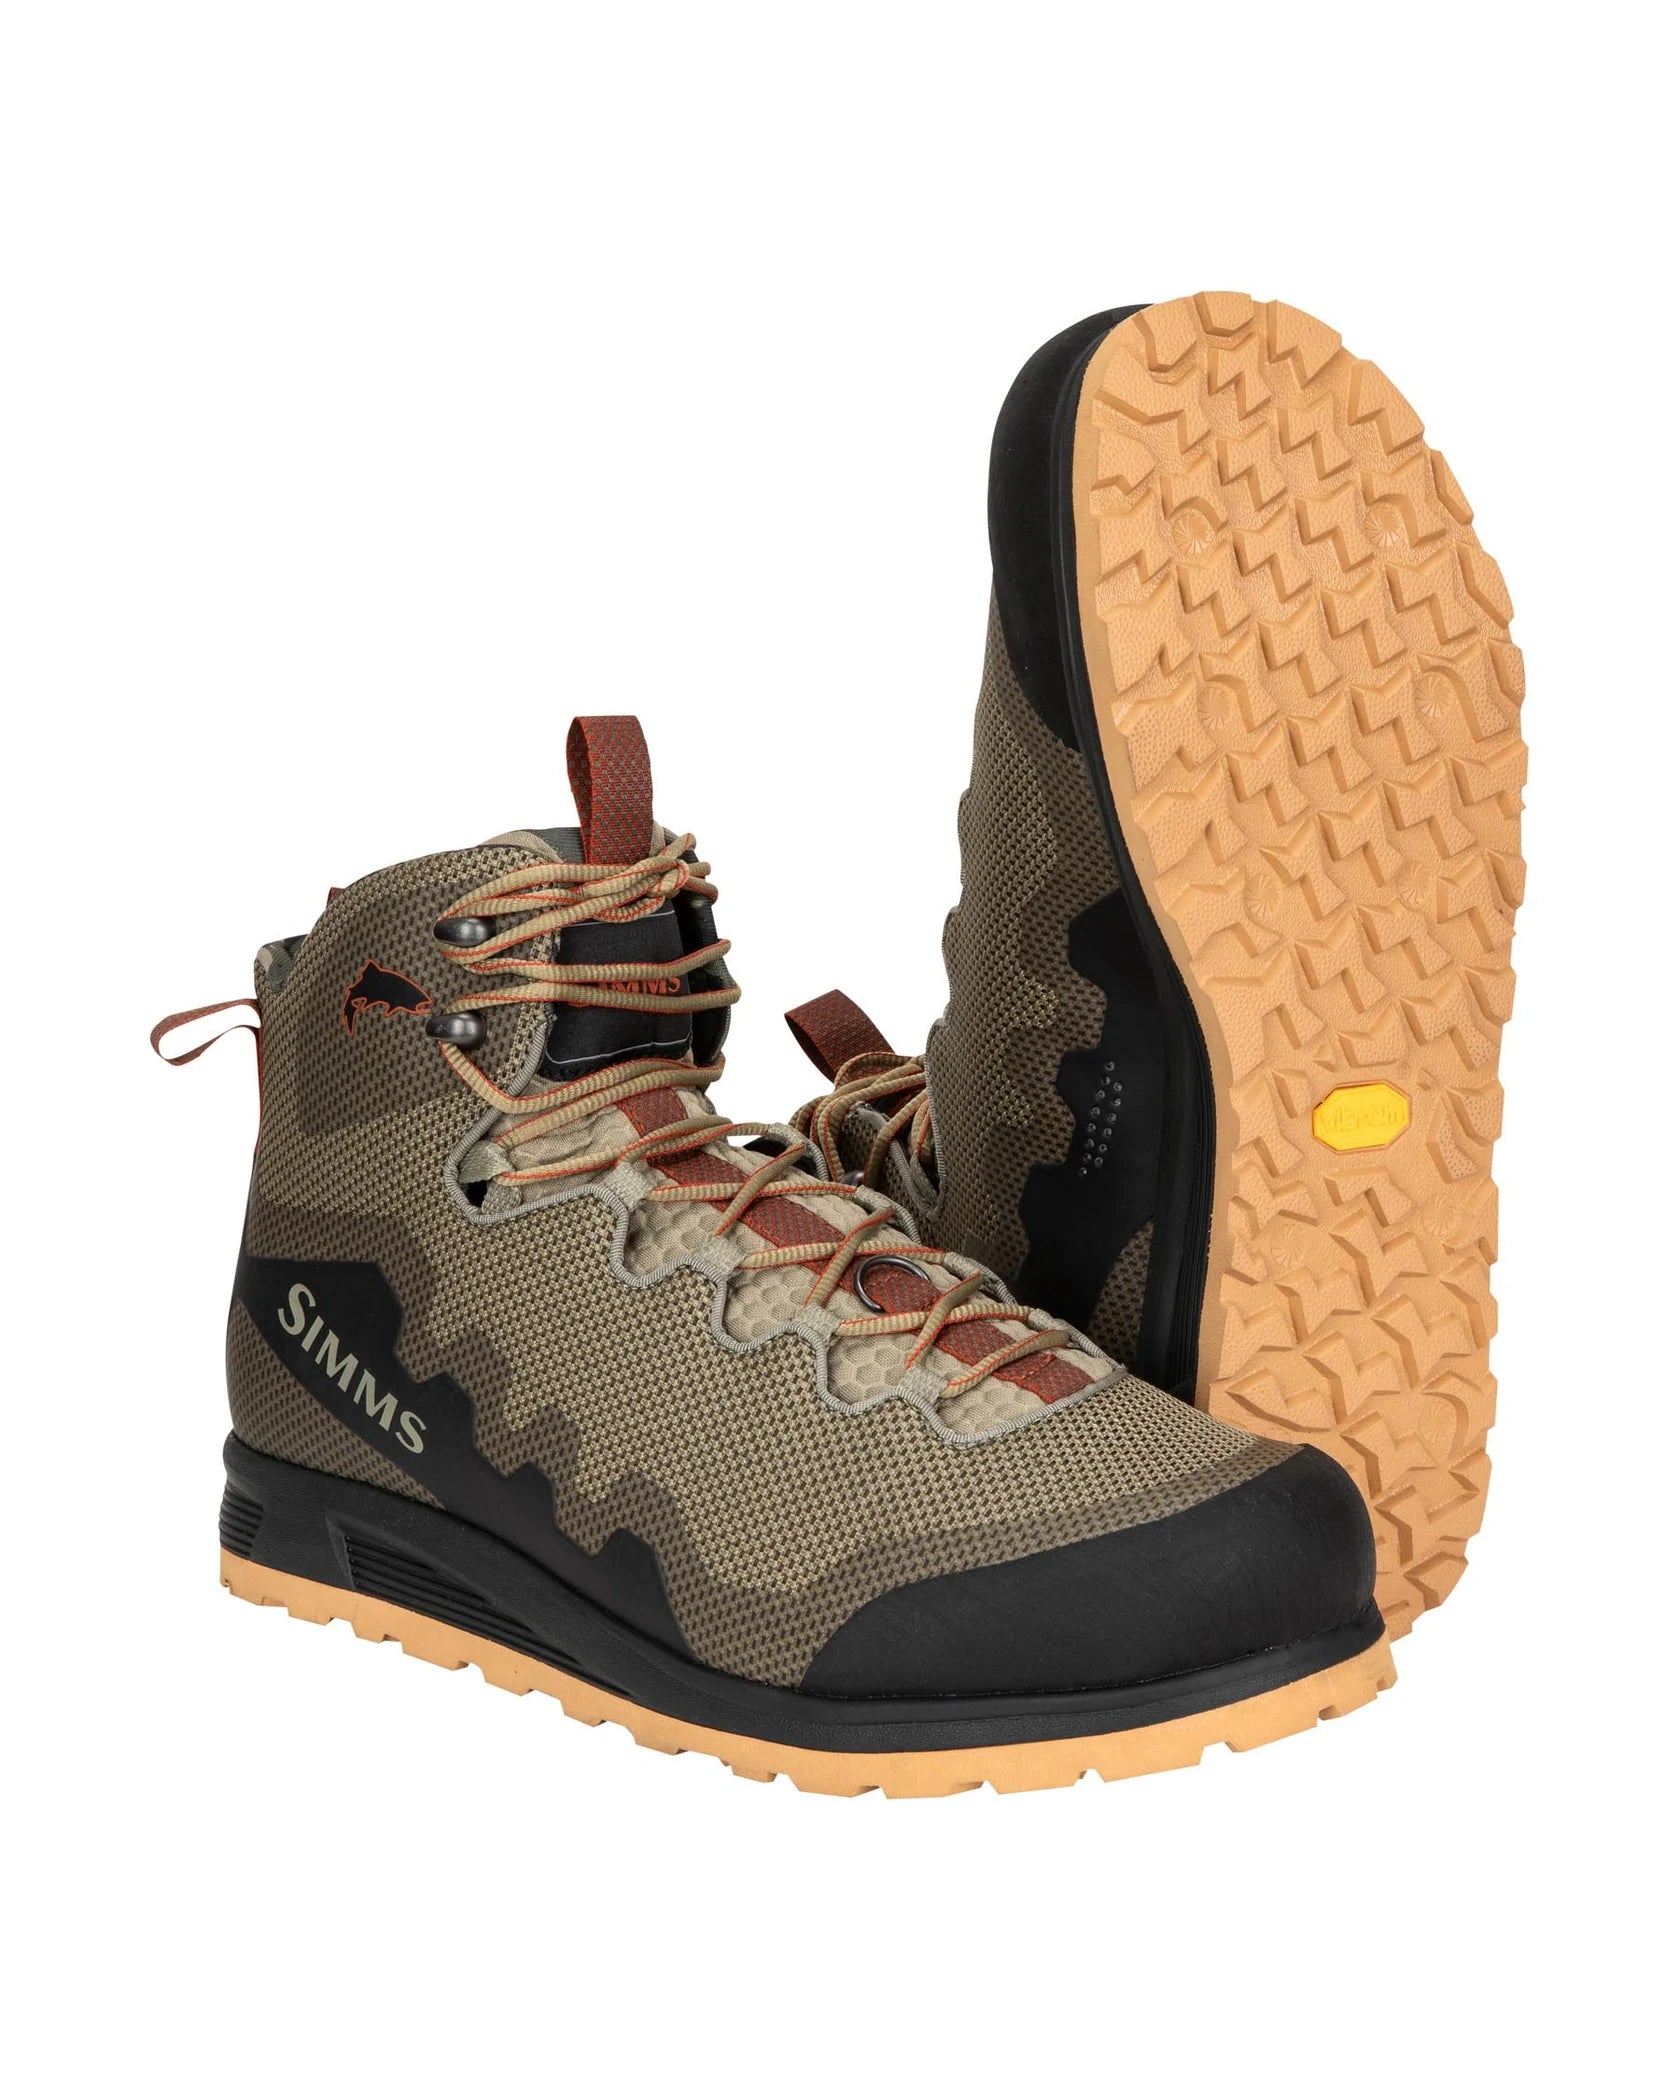 Simms Flyweight Access Wading Boot - 9 - Mansfield Hunting & Fishing - Products to prepare for Corona Virus